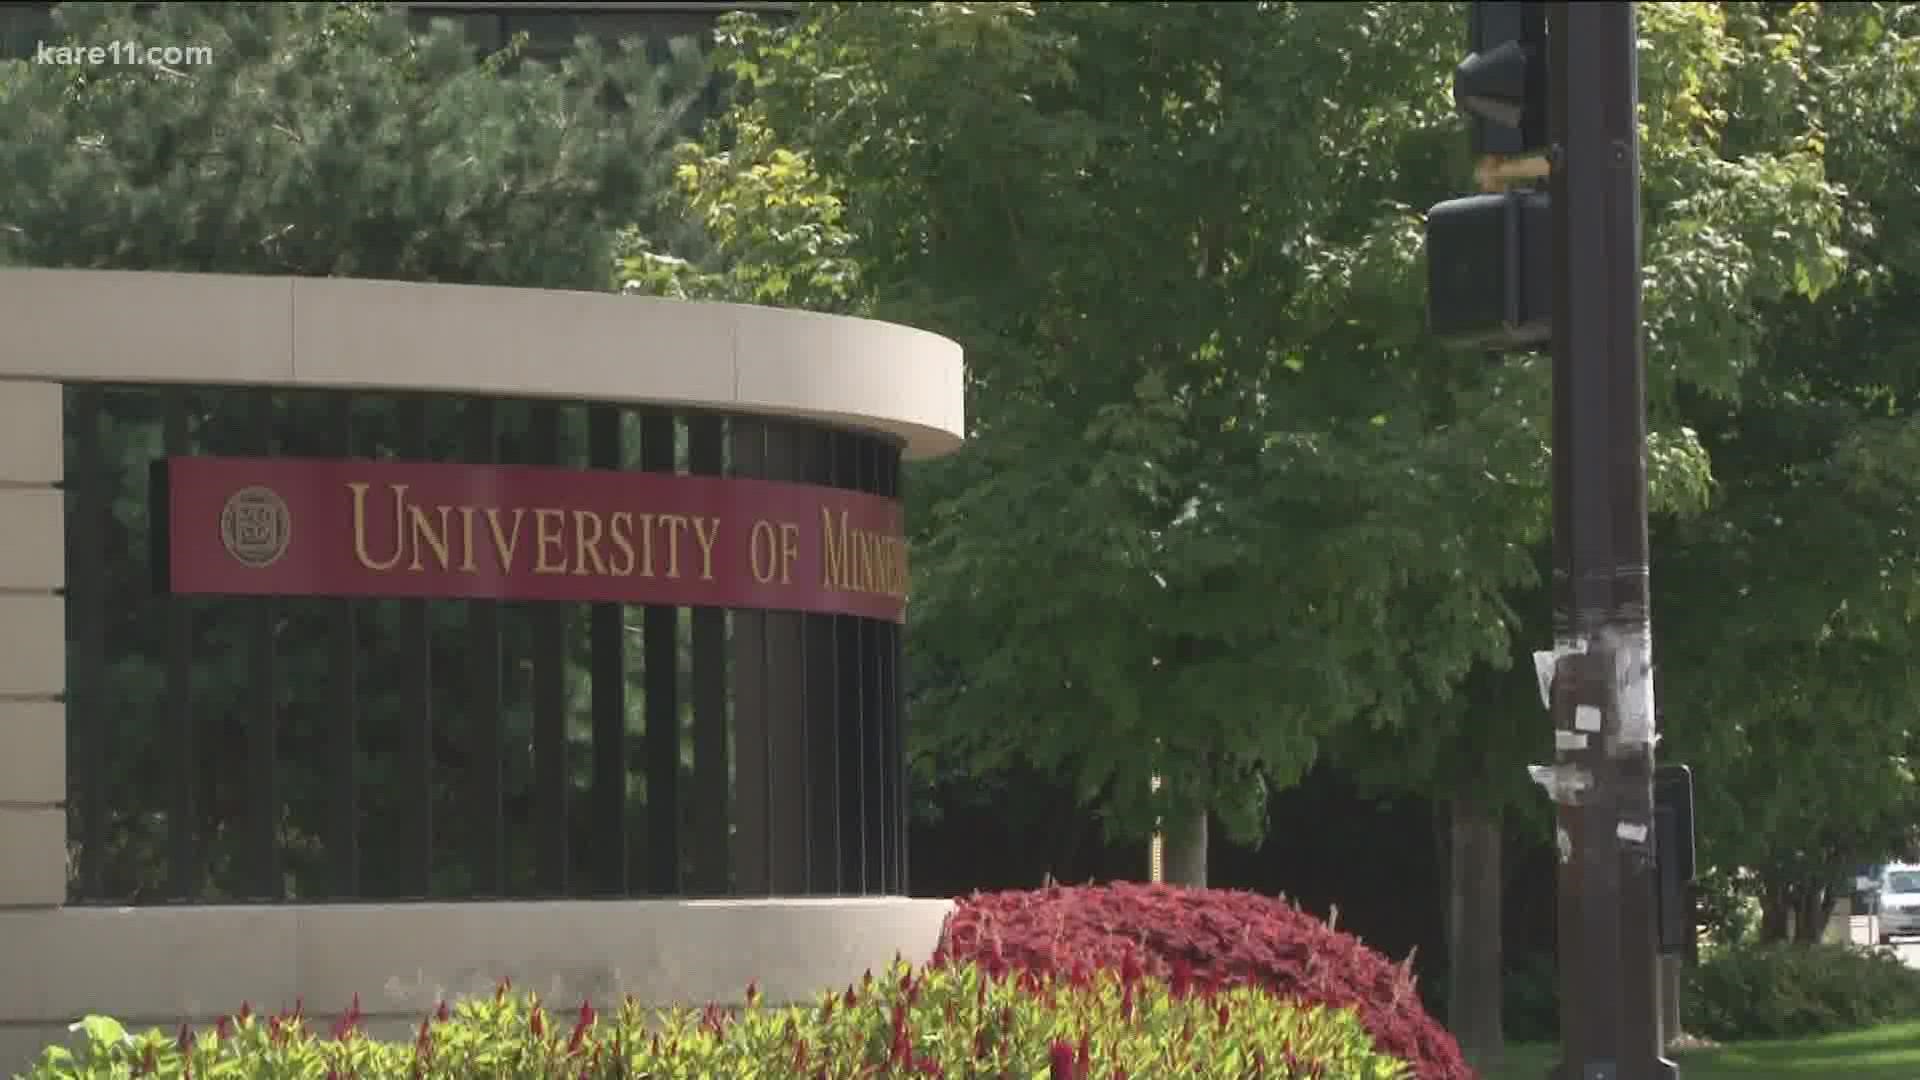 The University of Minnesota is back to school and focusing on student safety both on and off campus.